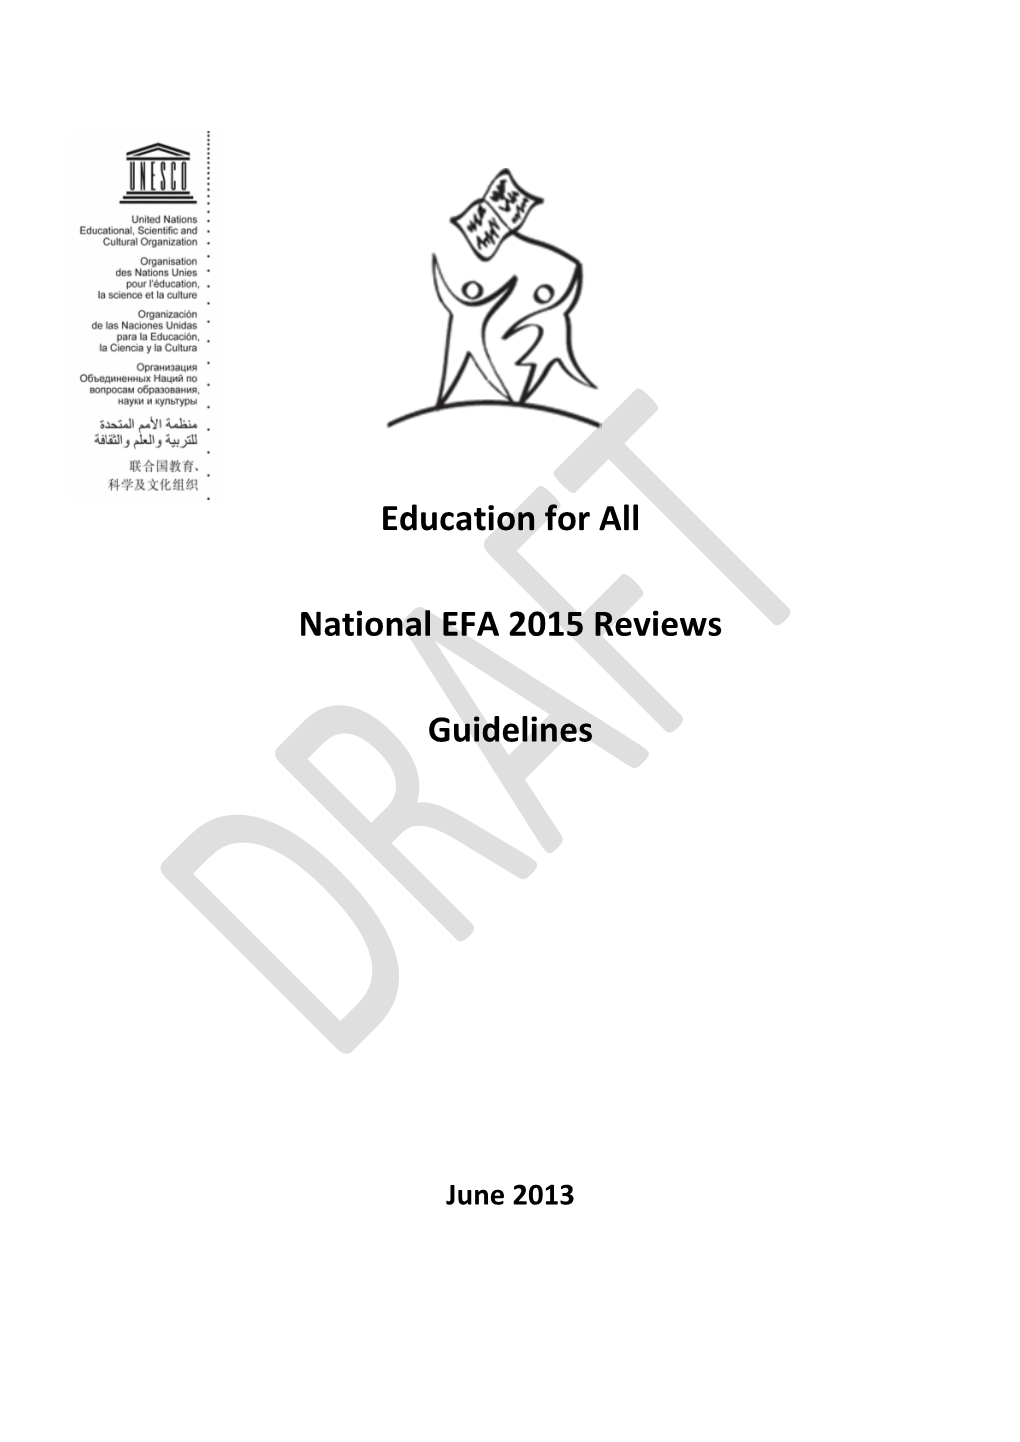 Education for All National EFA 2015 Reviews Guidelines